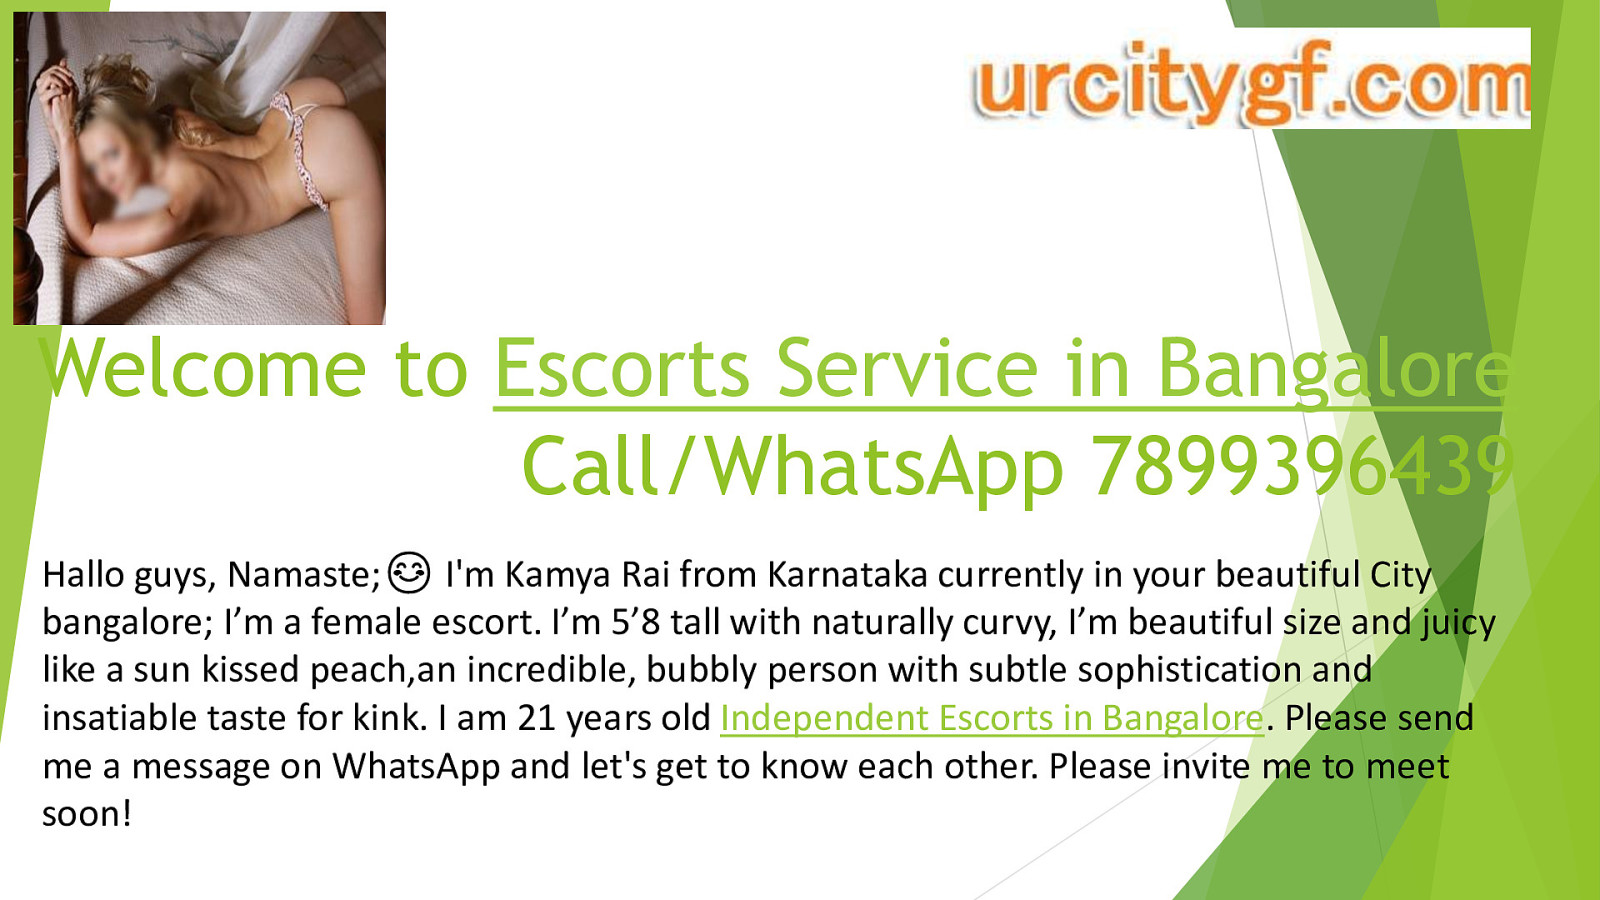 Major Activities to Engage with Bangalore Escorts in Bangalore